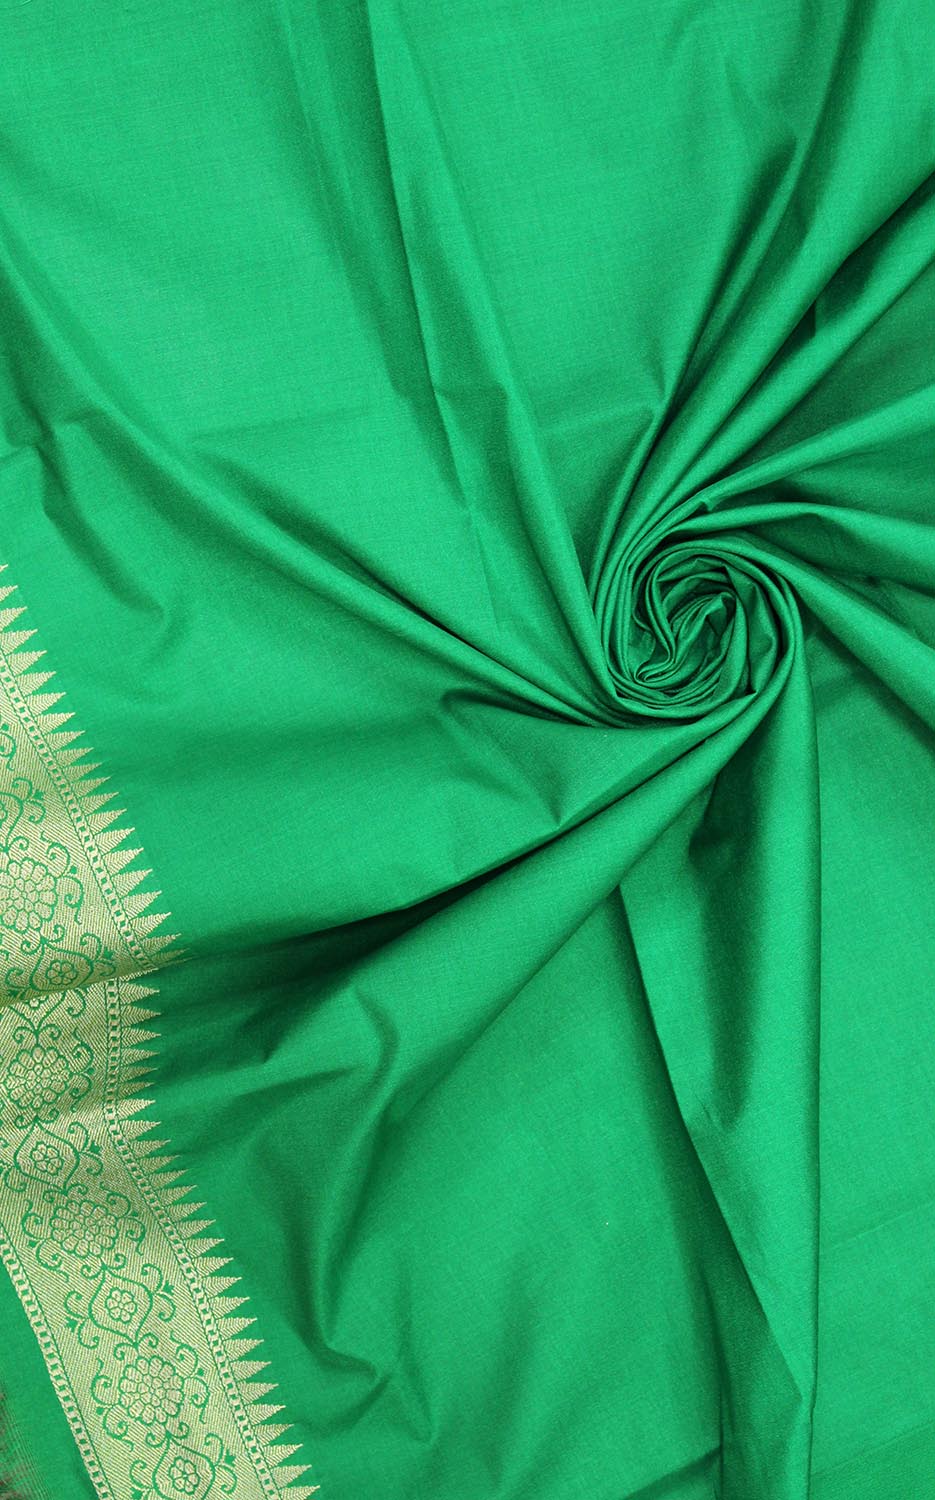 Get the Latest Green and Red Handloom Banarasi Silk Saree with Contrast Border - Shop Now! - Luxurion World